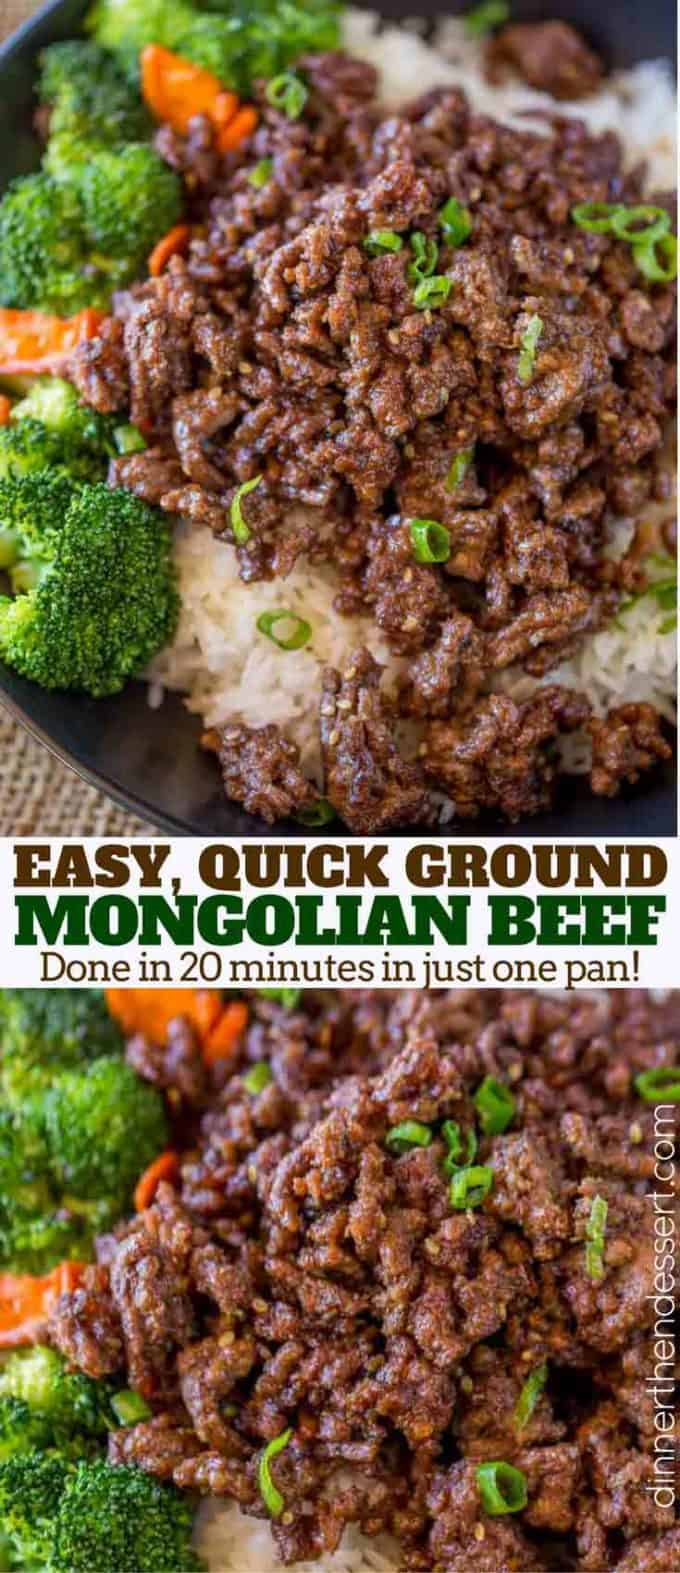 Mongolian beef made with ground beef